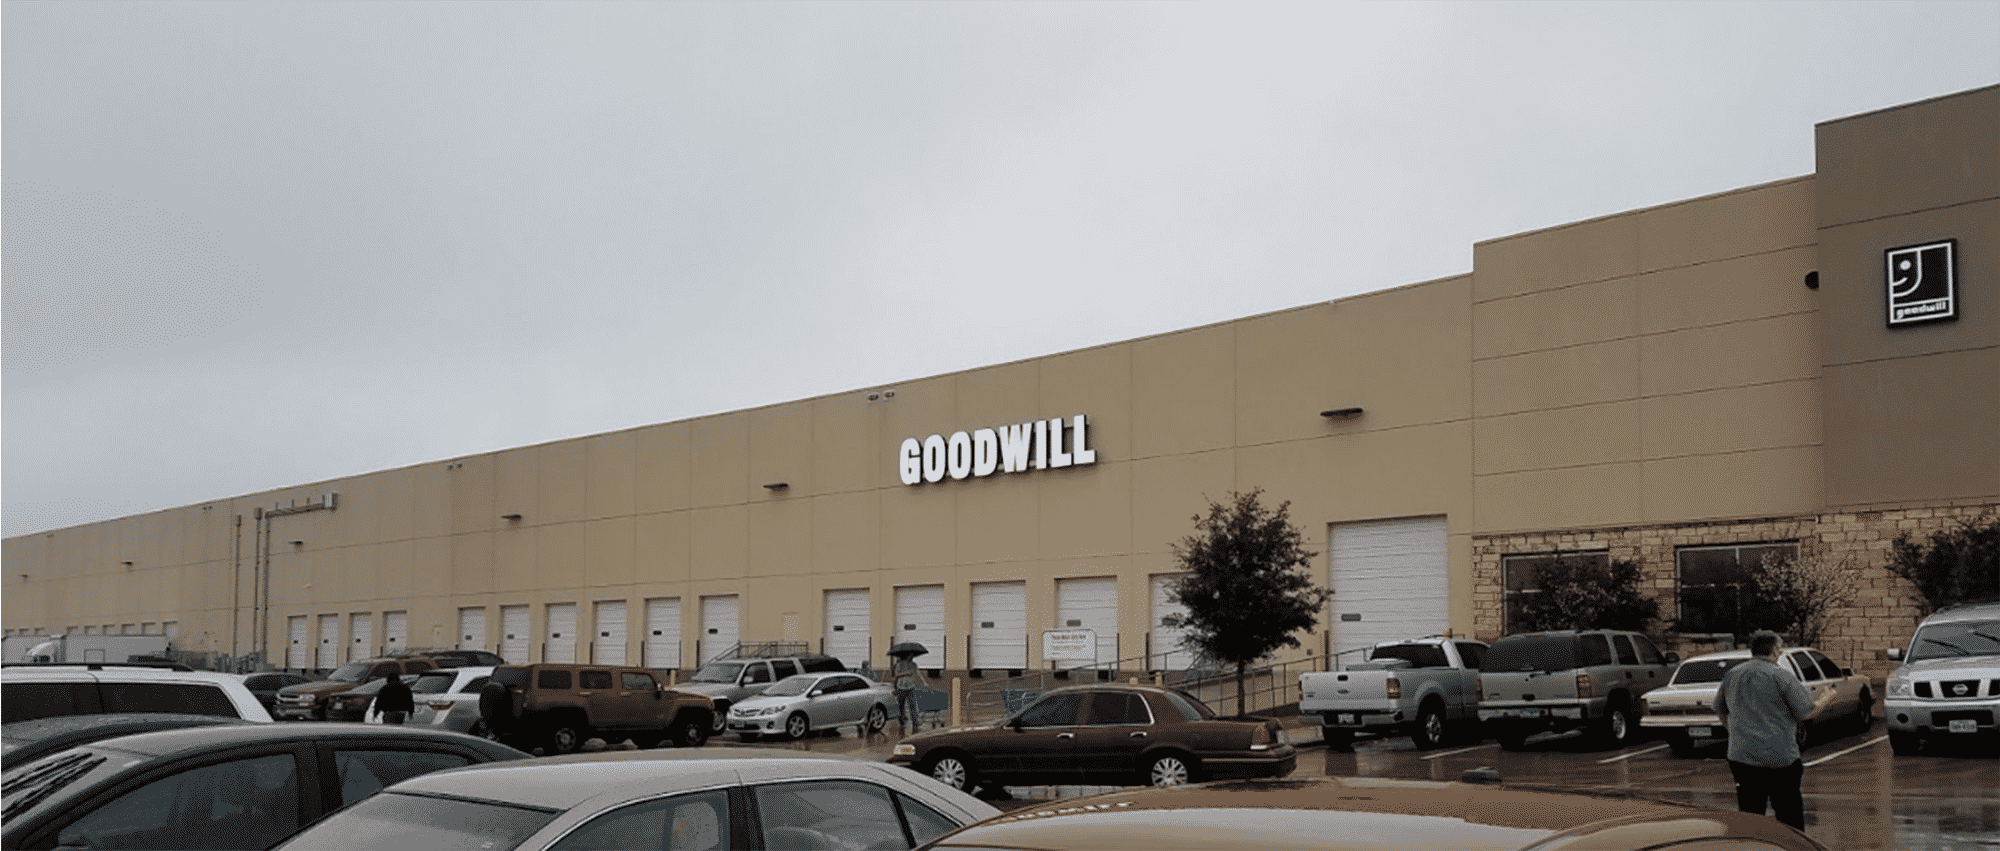 Goodwill North Austin Outlet Exterior